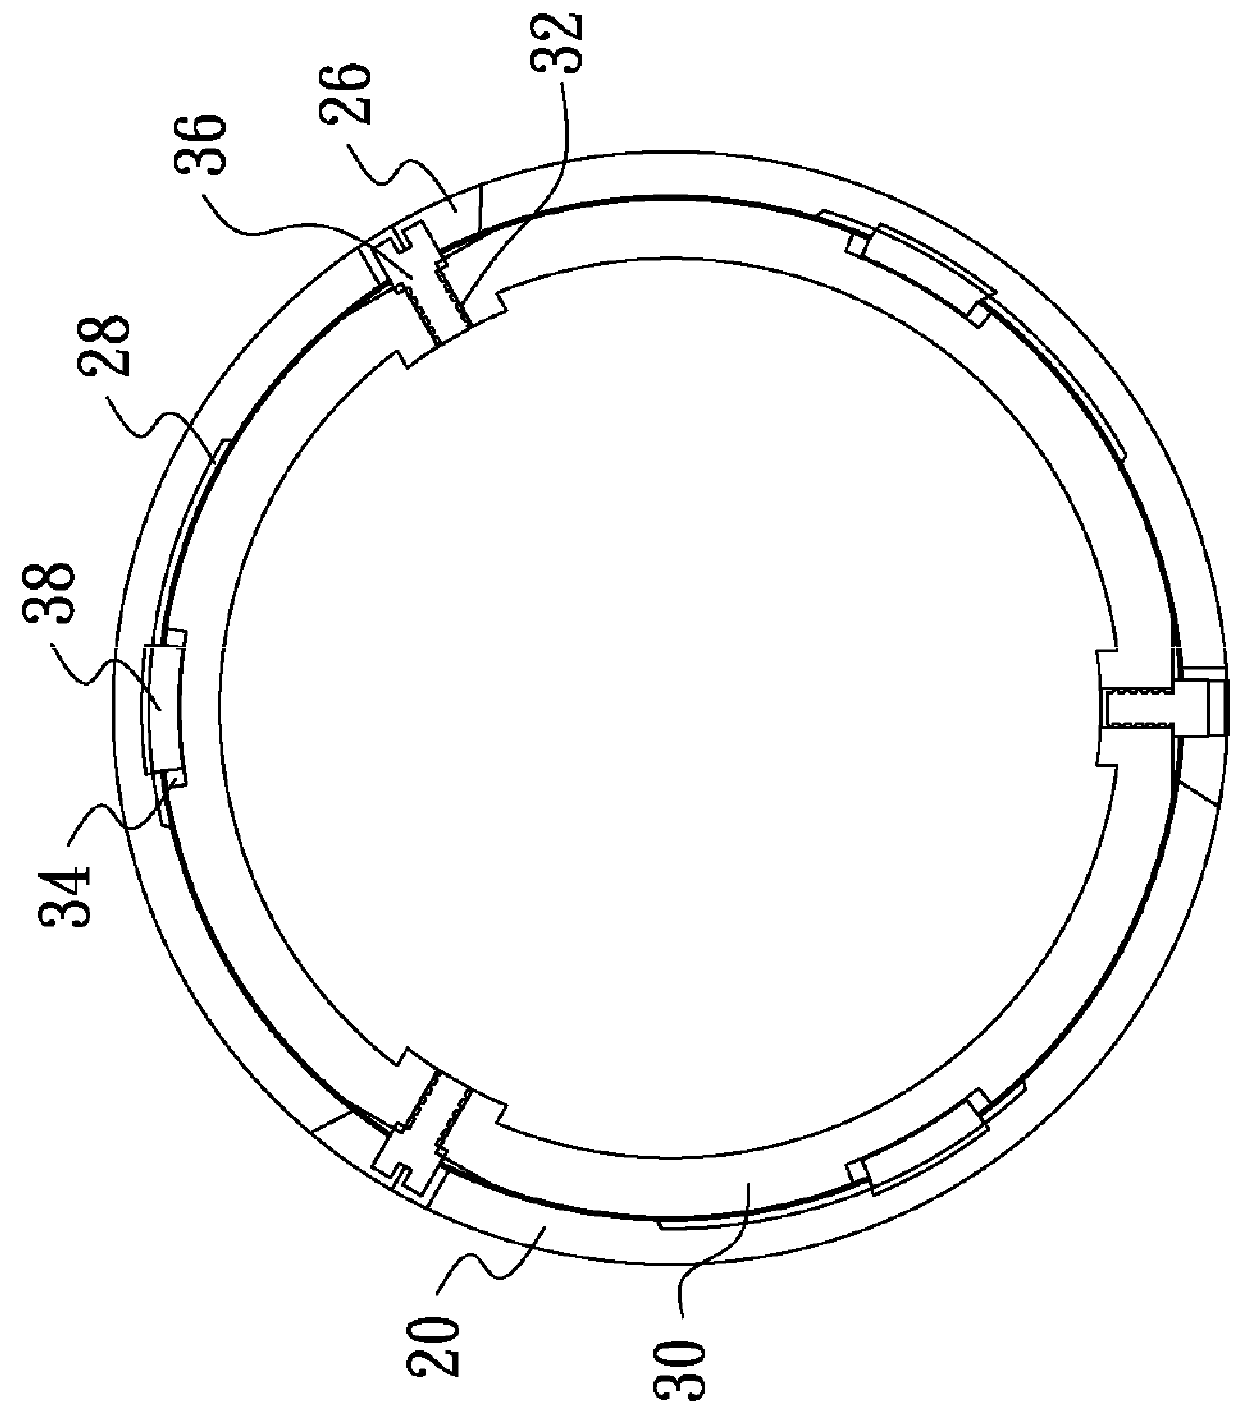 Ocular Structure for Observation Apparatus